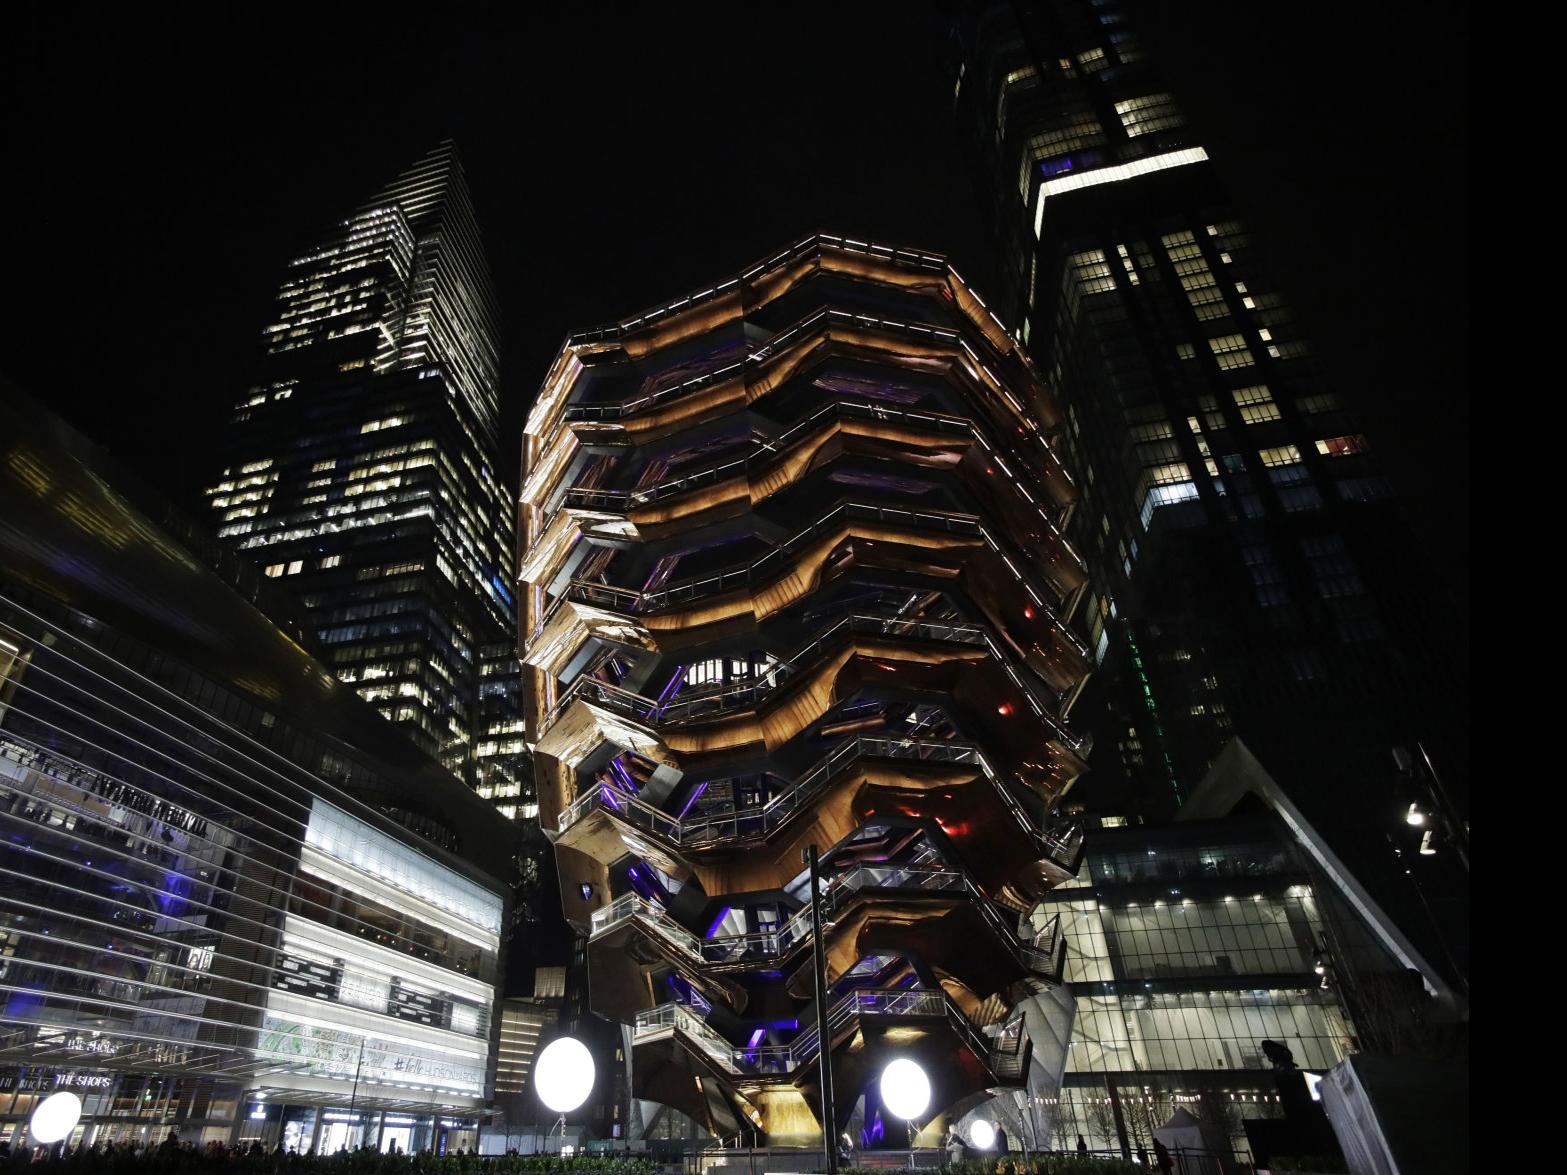 Neiman Marcus gears up to open Hudson Yards location